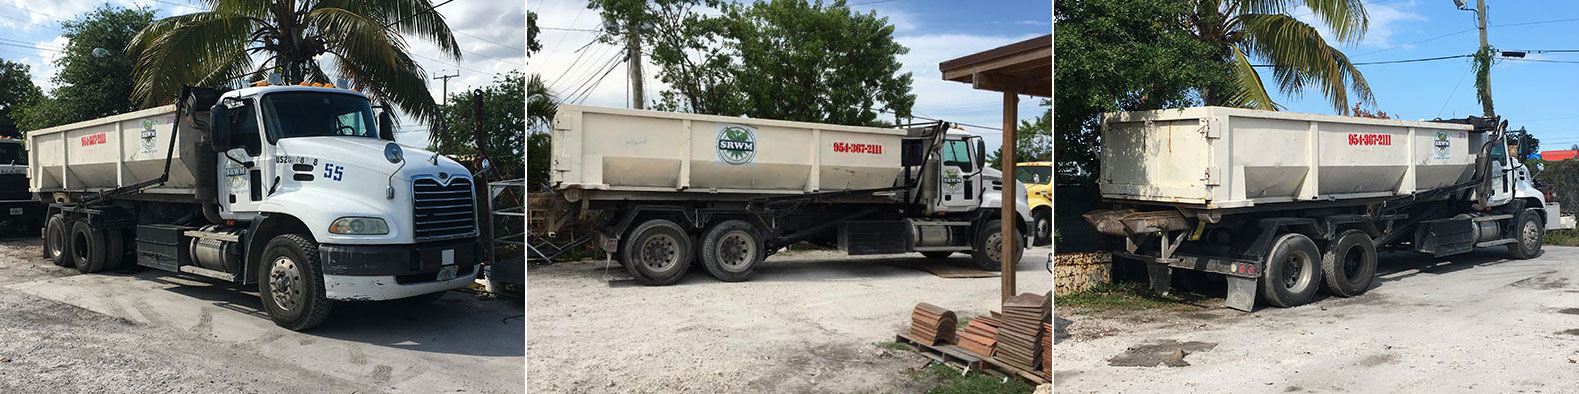 Superior Recycling & Waste Management, Inc.